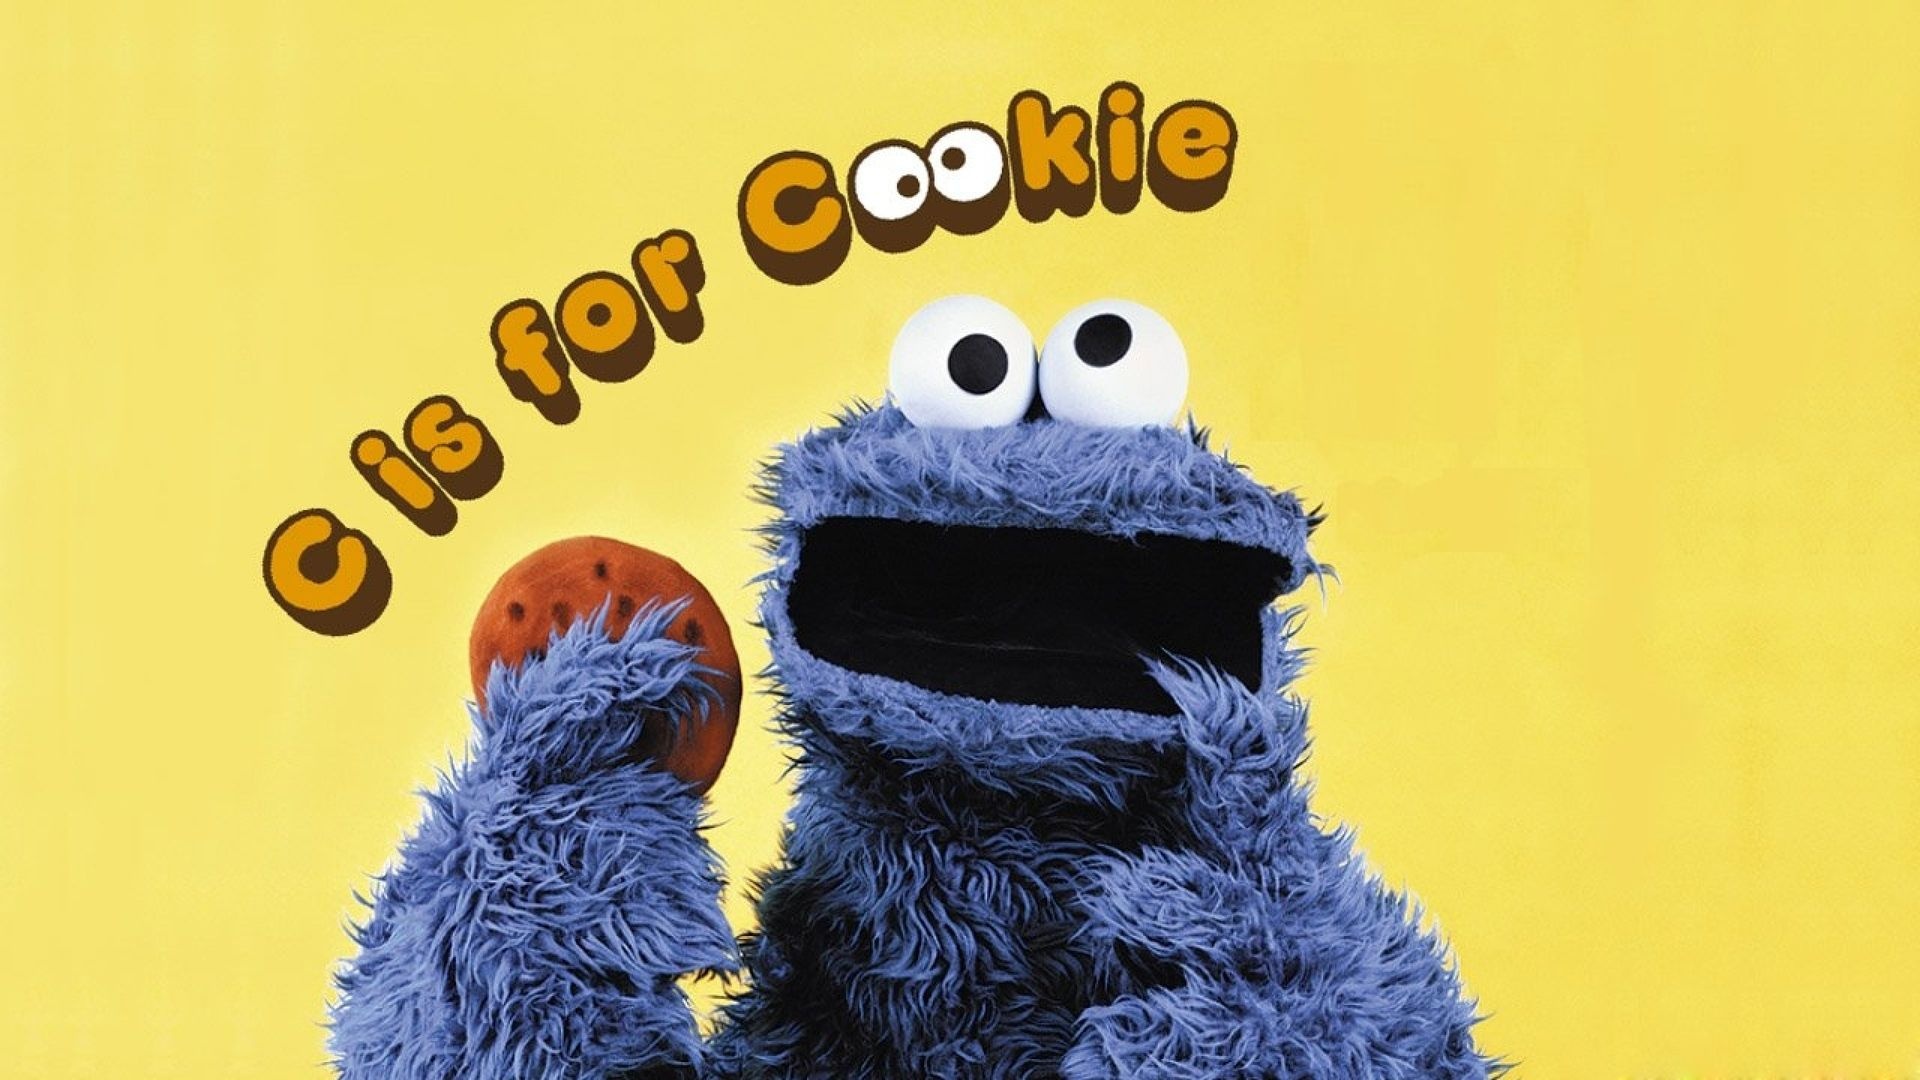 Cute Cookie Monster, Adorable wallpapers, Playful backgrounds, Irresistible charm, 1920x1080 Full HD Desktop